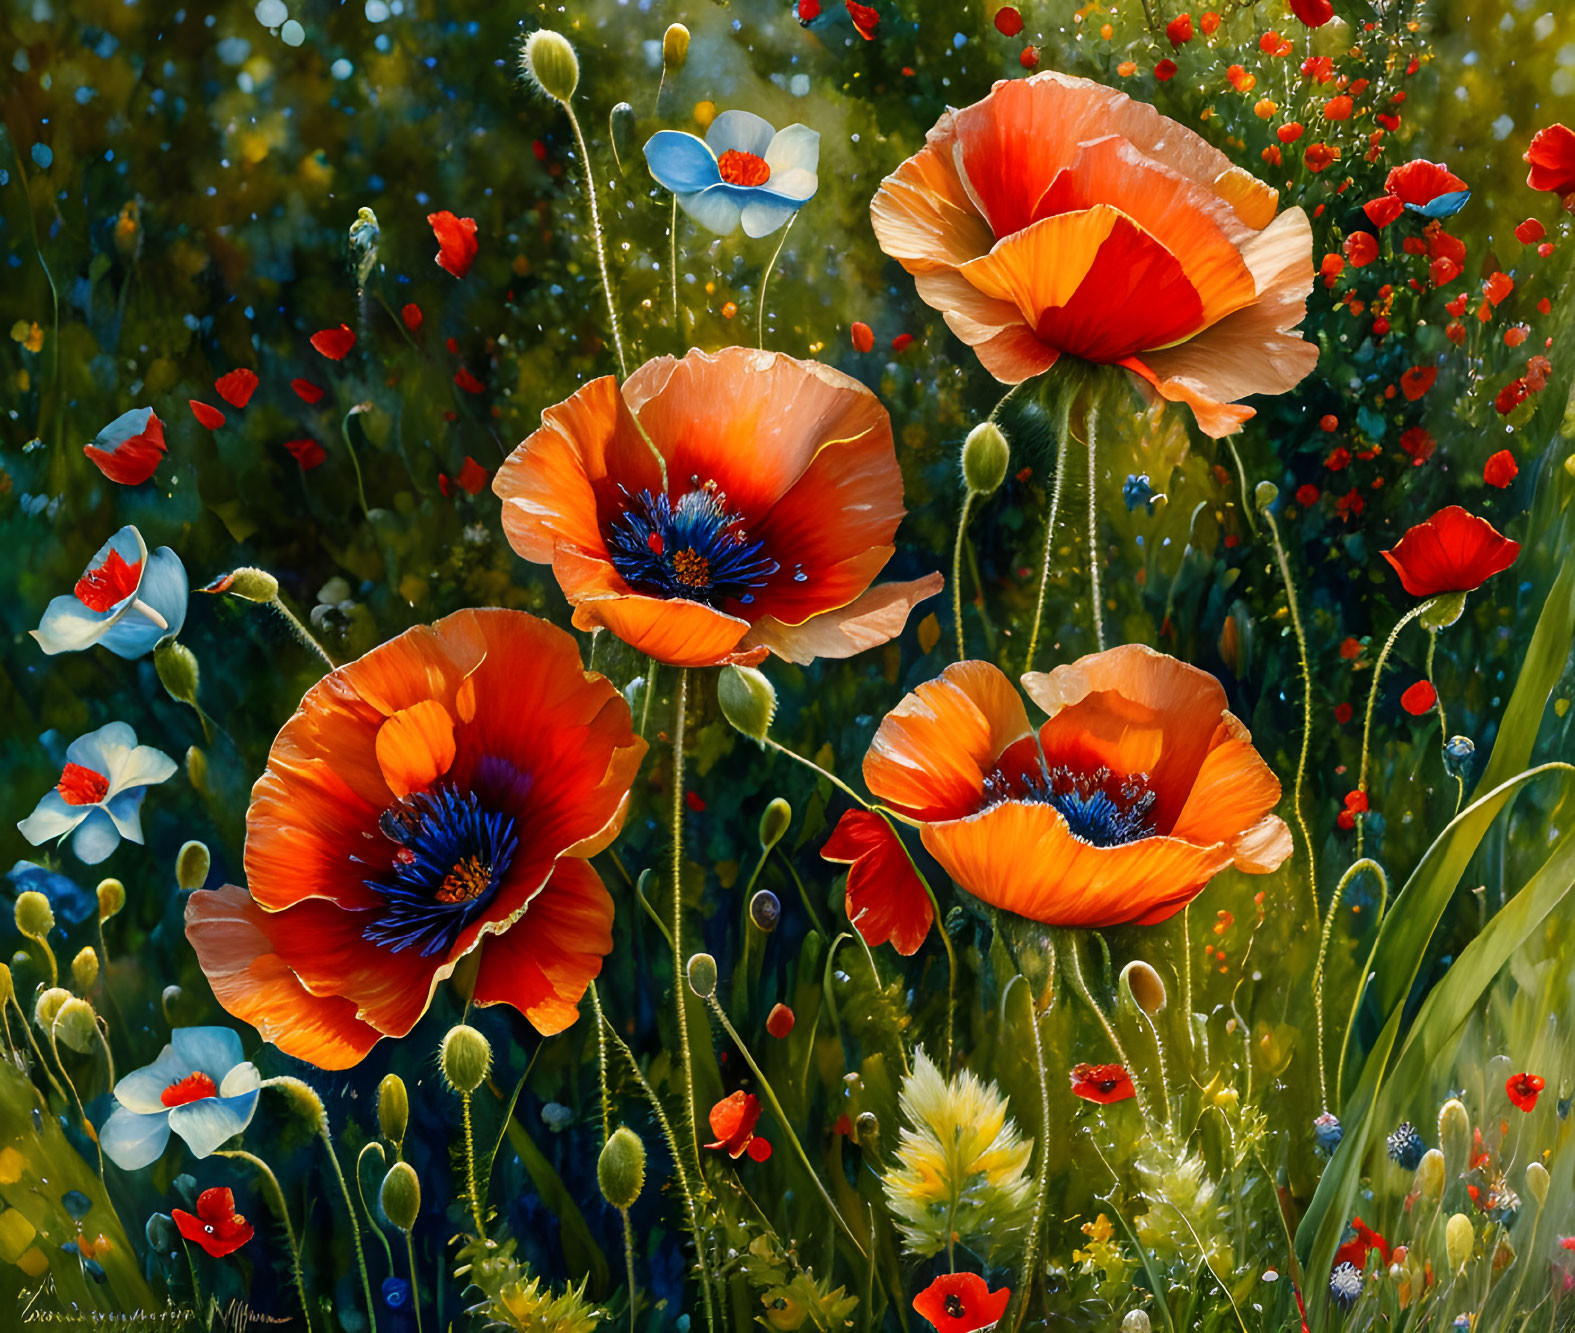 Colorful floral painting with poppies, cornflowers, foliage, and buds on a light bokeh